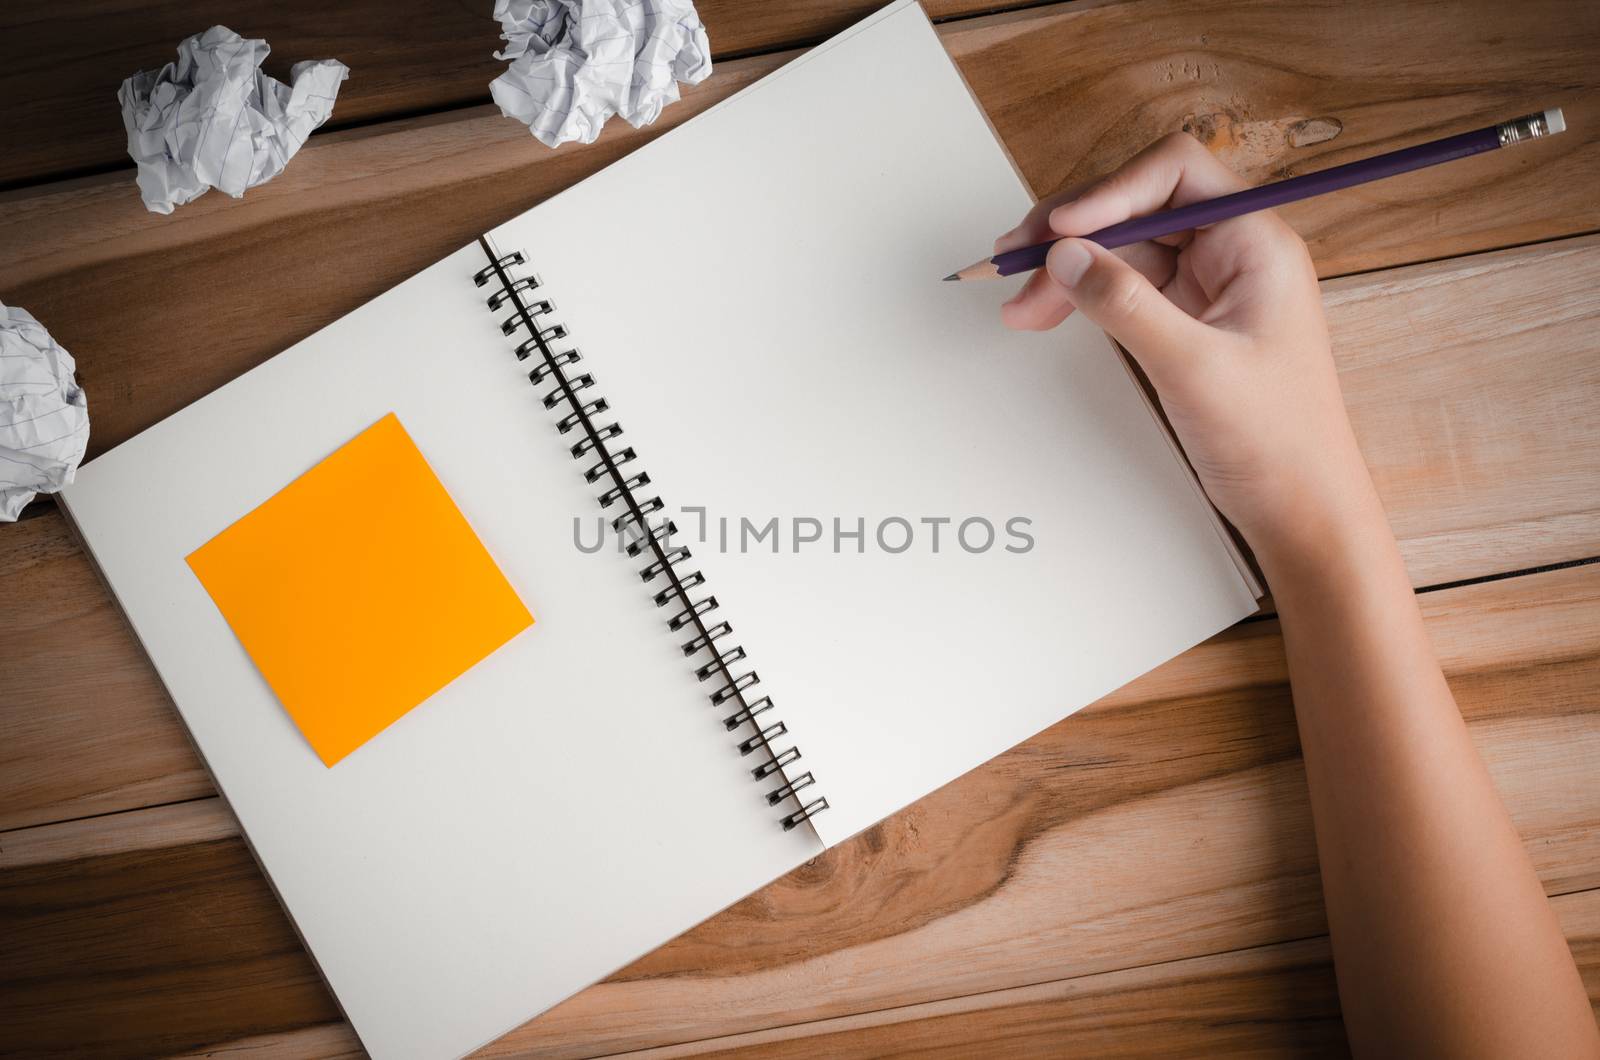 Hand-written note in pencil on a wooden table - hand focus by photobyphotoboy